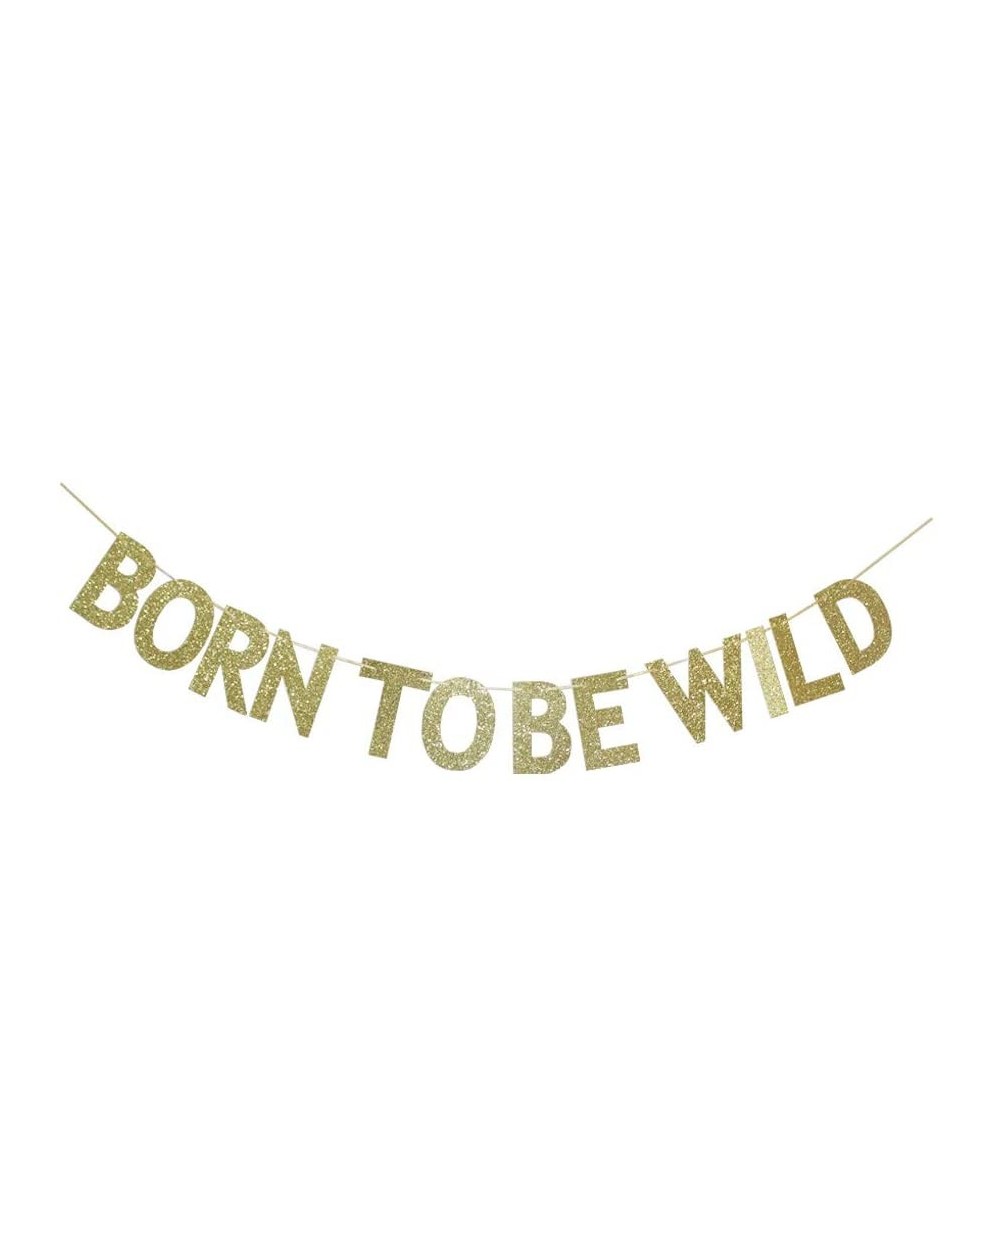 Banners & Garlands Born to Be Wild Banner- Gold Glitter Paper Sign for Baby Shower Party- Baby's First Birthday Party Decors ...